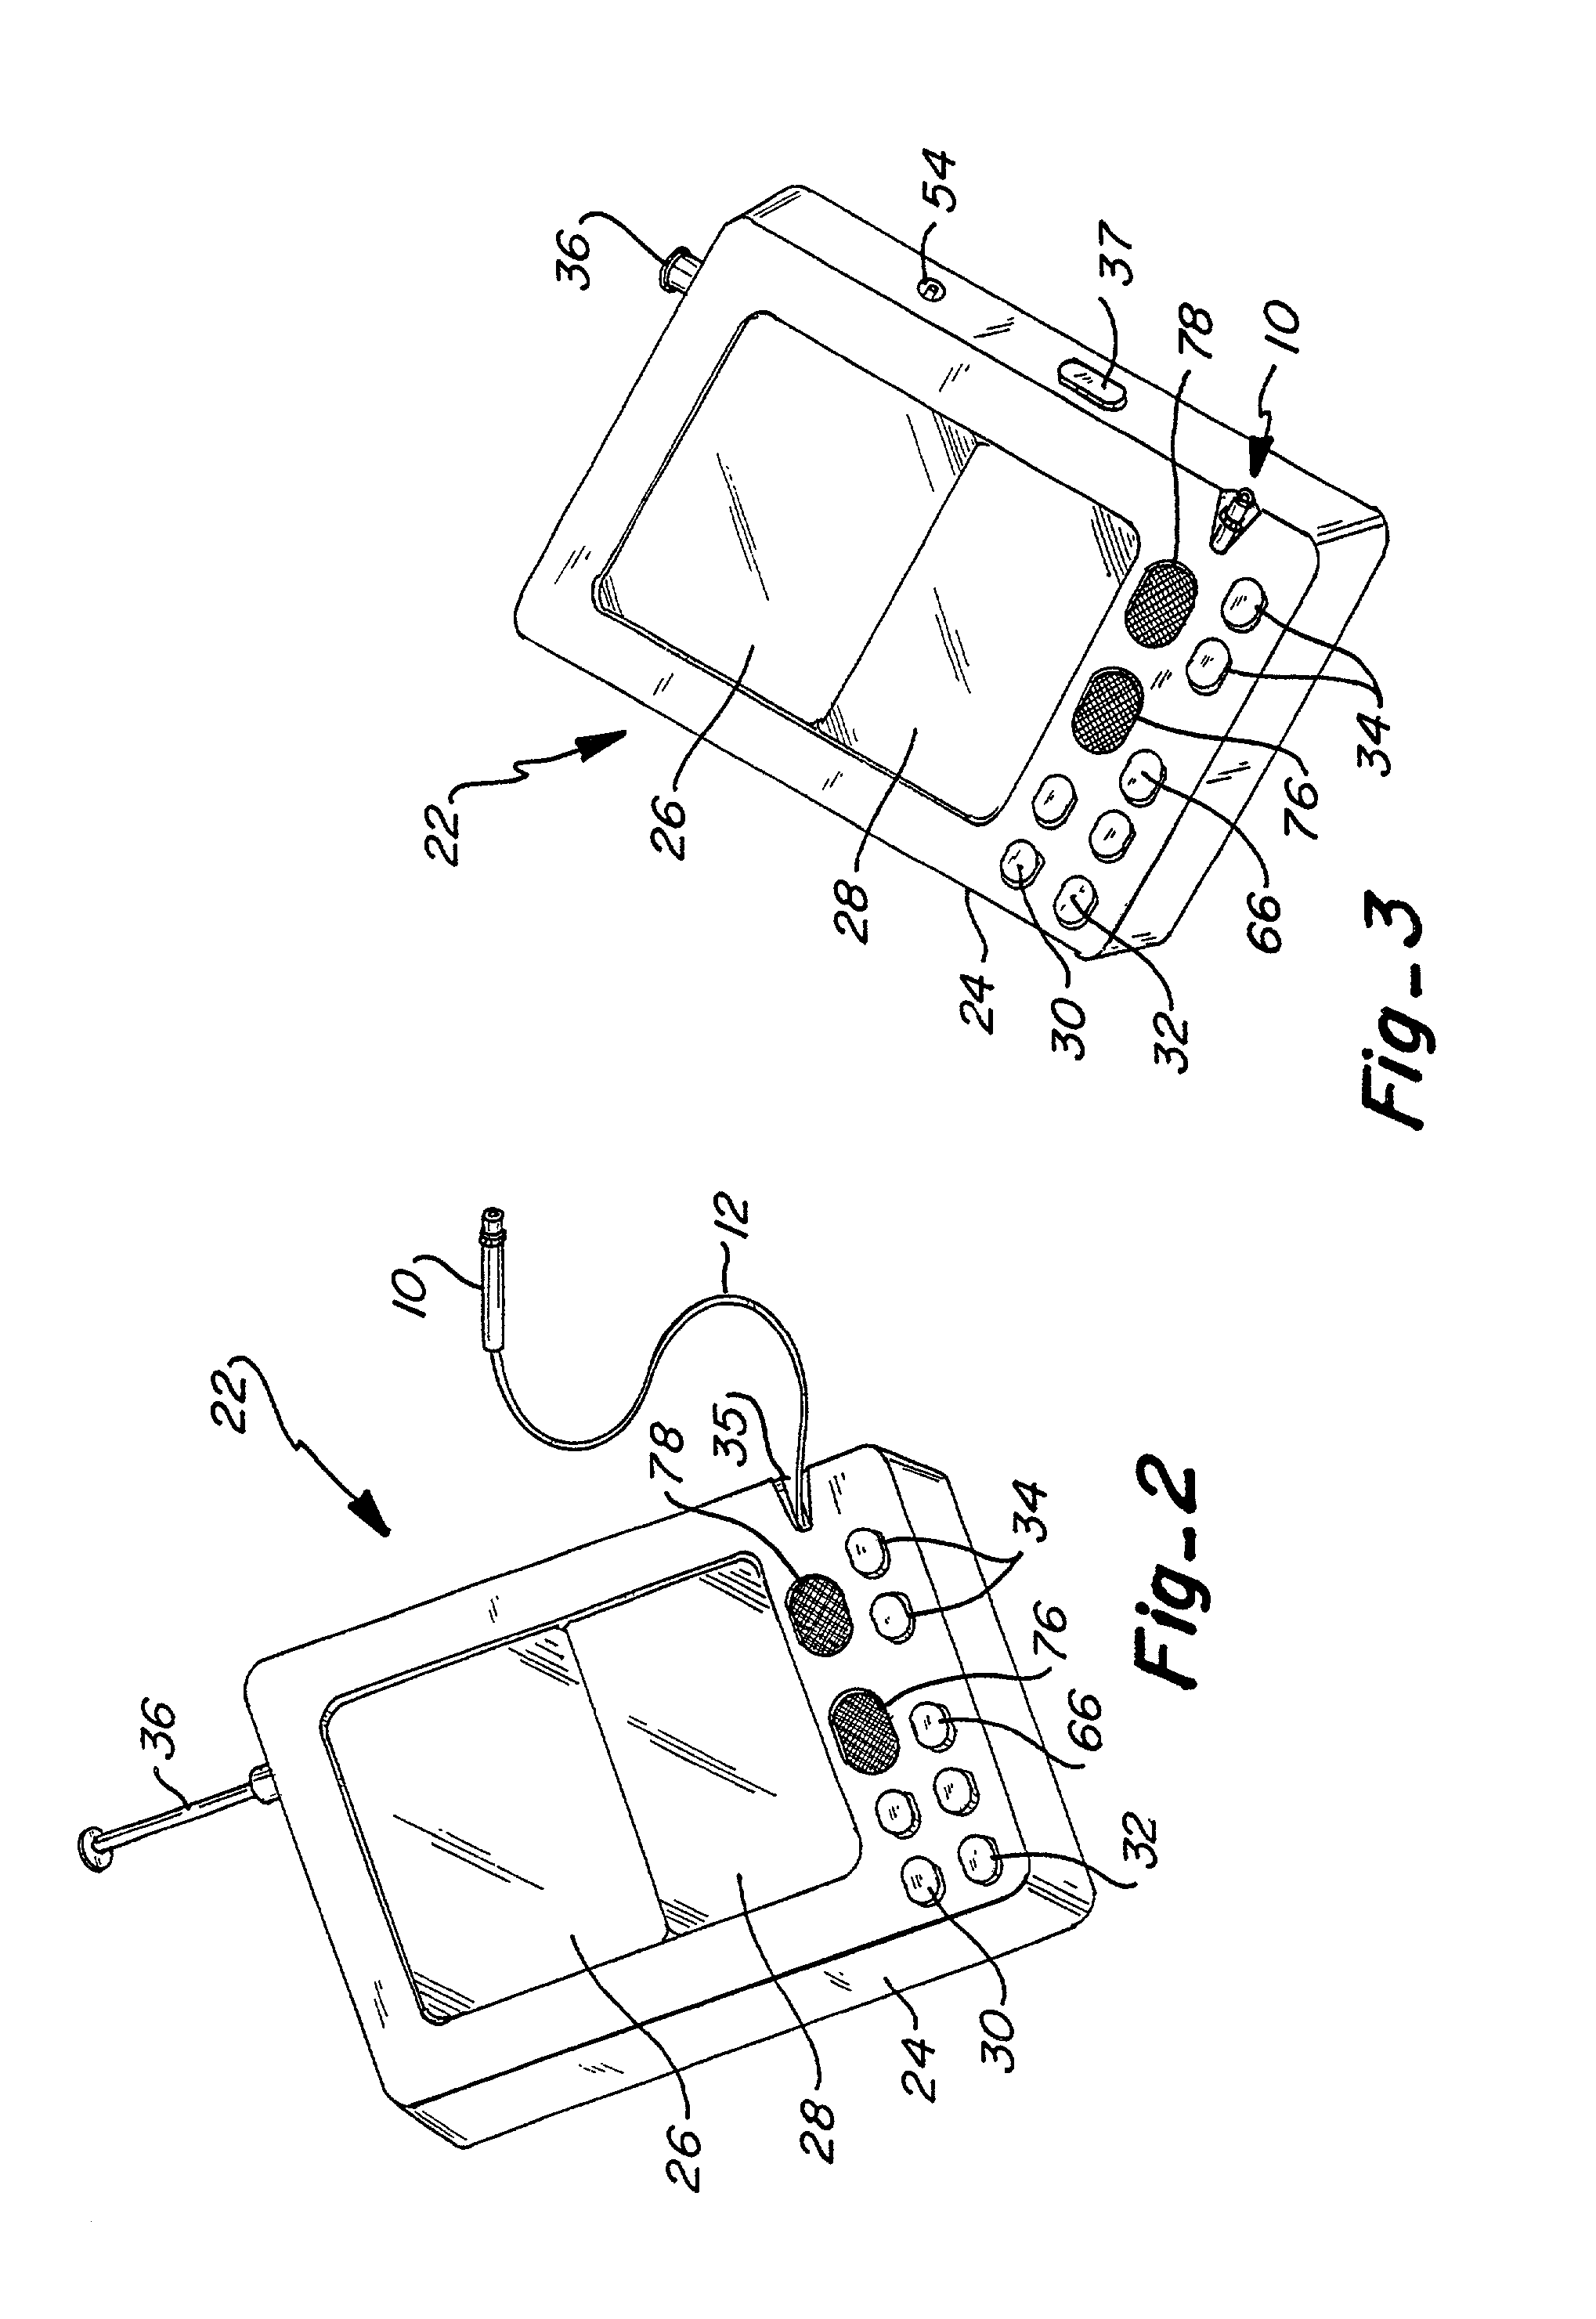 Hand-held computers incorporating reduced area imaging devices